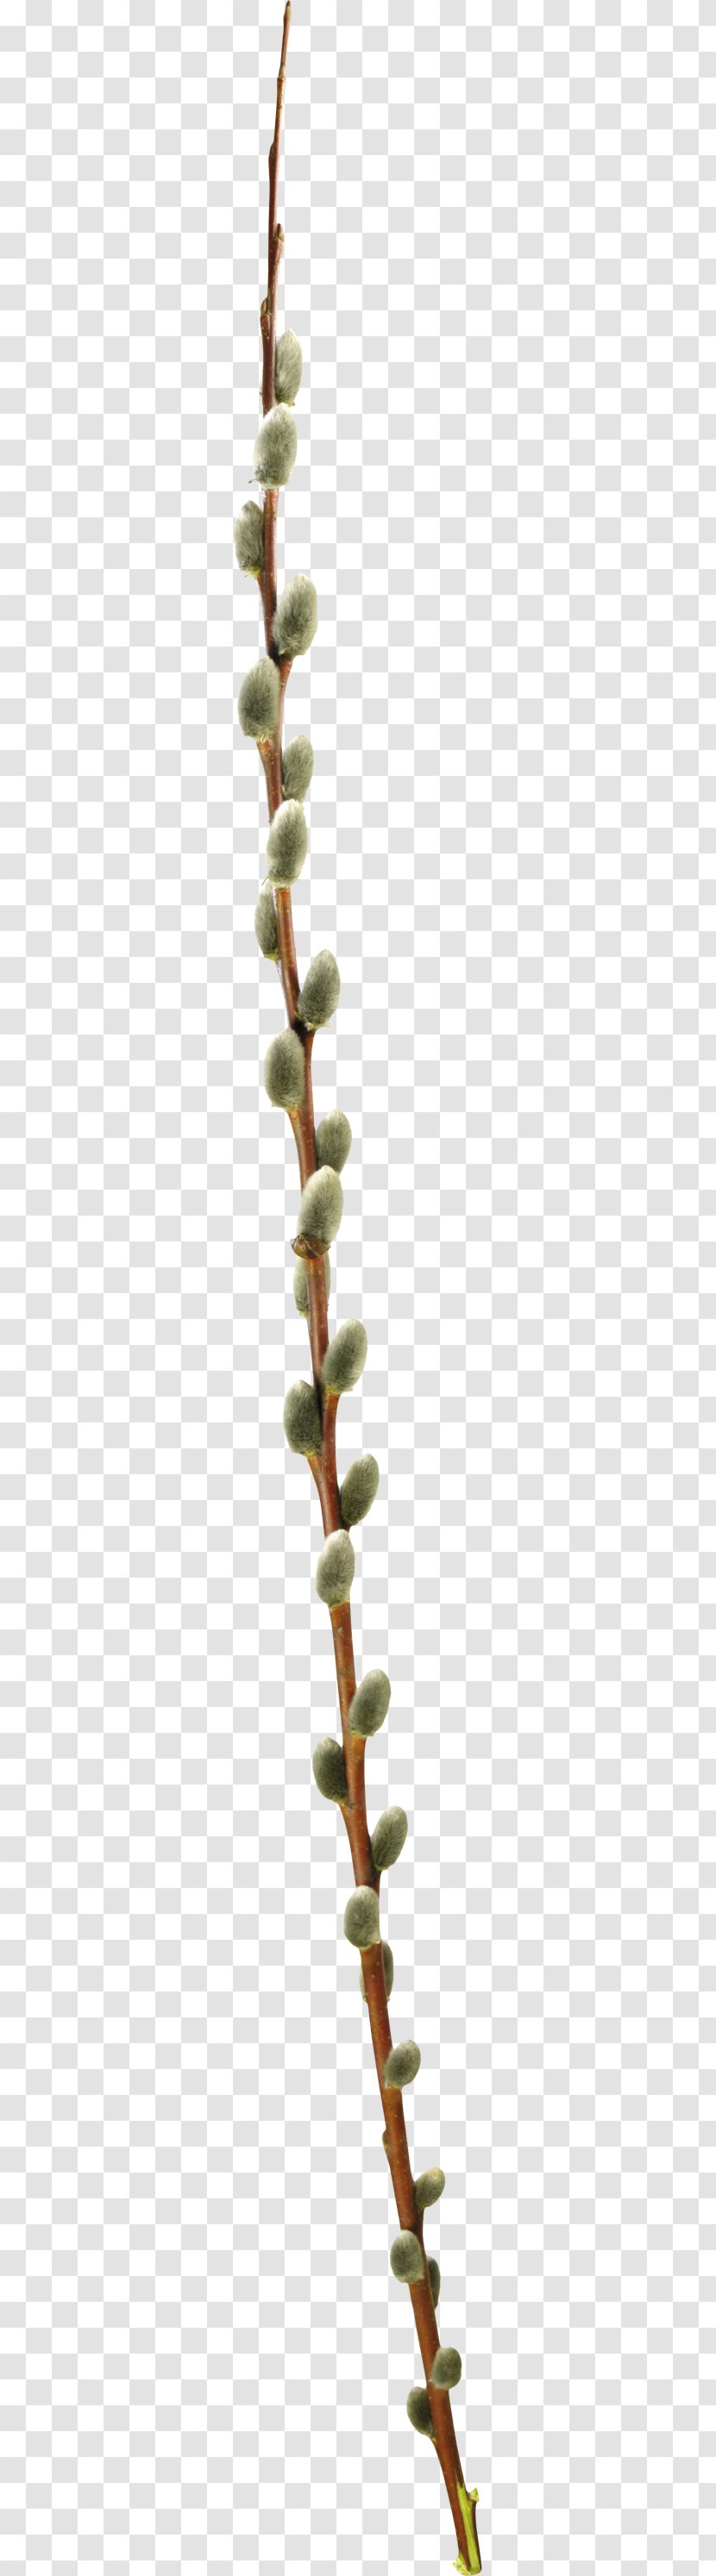 Willow Photography Clip Art - Plant - Twig Transparent PNG